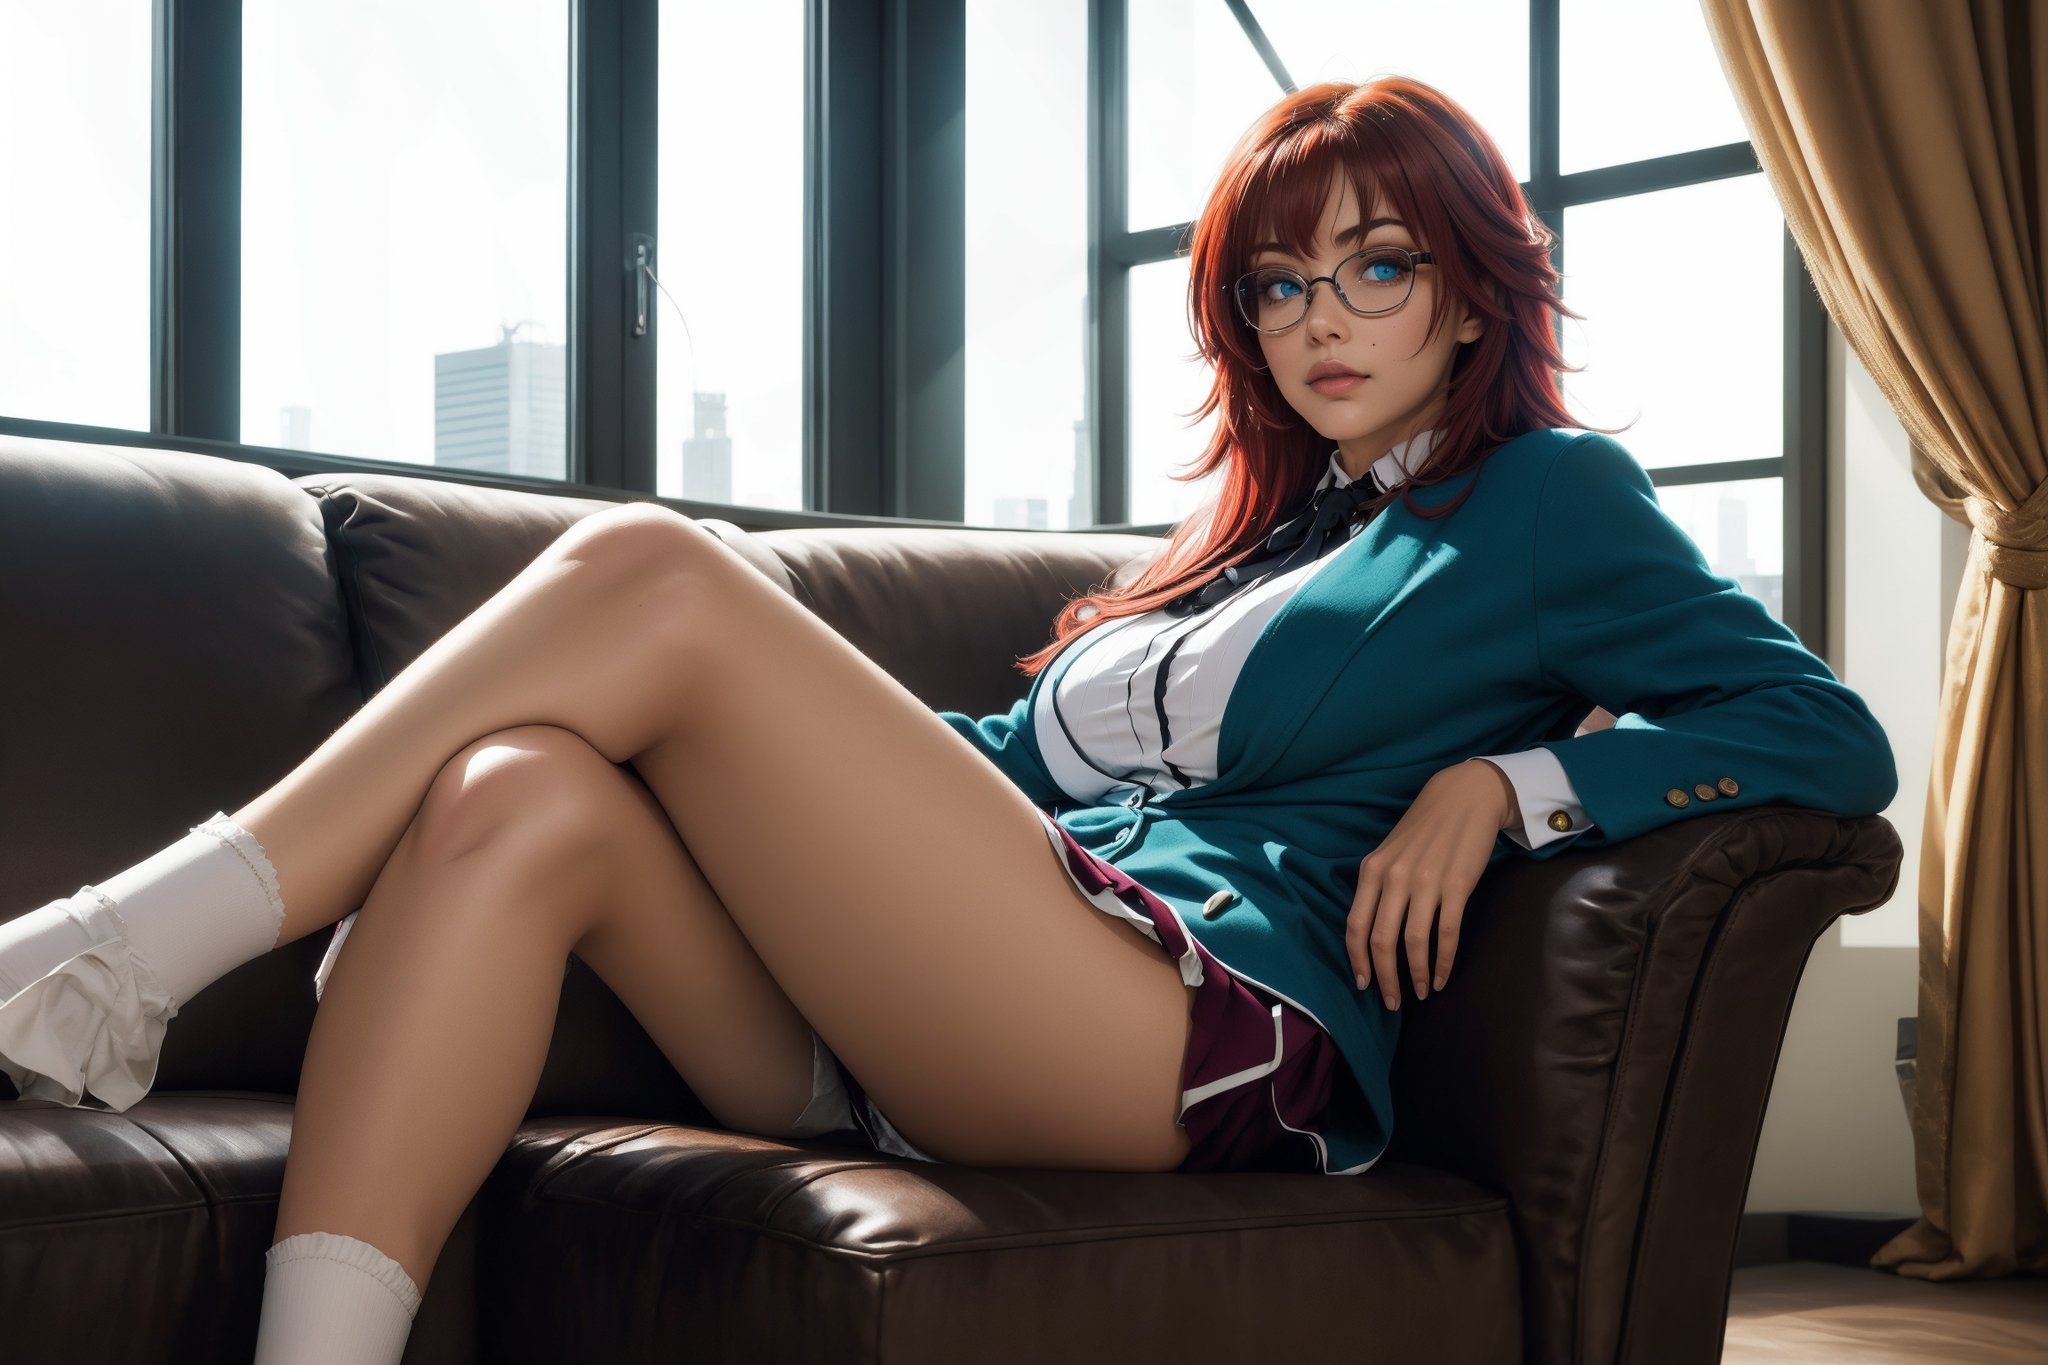 Rias Gremory reclines on a plush couch, legs crossed, crimson locks styled to perfection as she gazes off-camera with sultry intensity. Turquoise-blue eyes sparkle in soft, natural lighting that highlights moles and beauty marks on her skin. chool uniform clad, glasses perched on her nose, she exudes authority in full-body pose amidst sleek furniture and a large window framing the city's towering skyscrapers and bustling streets.